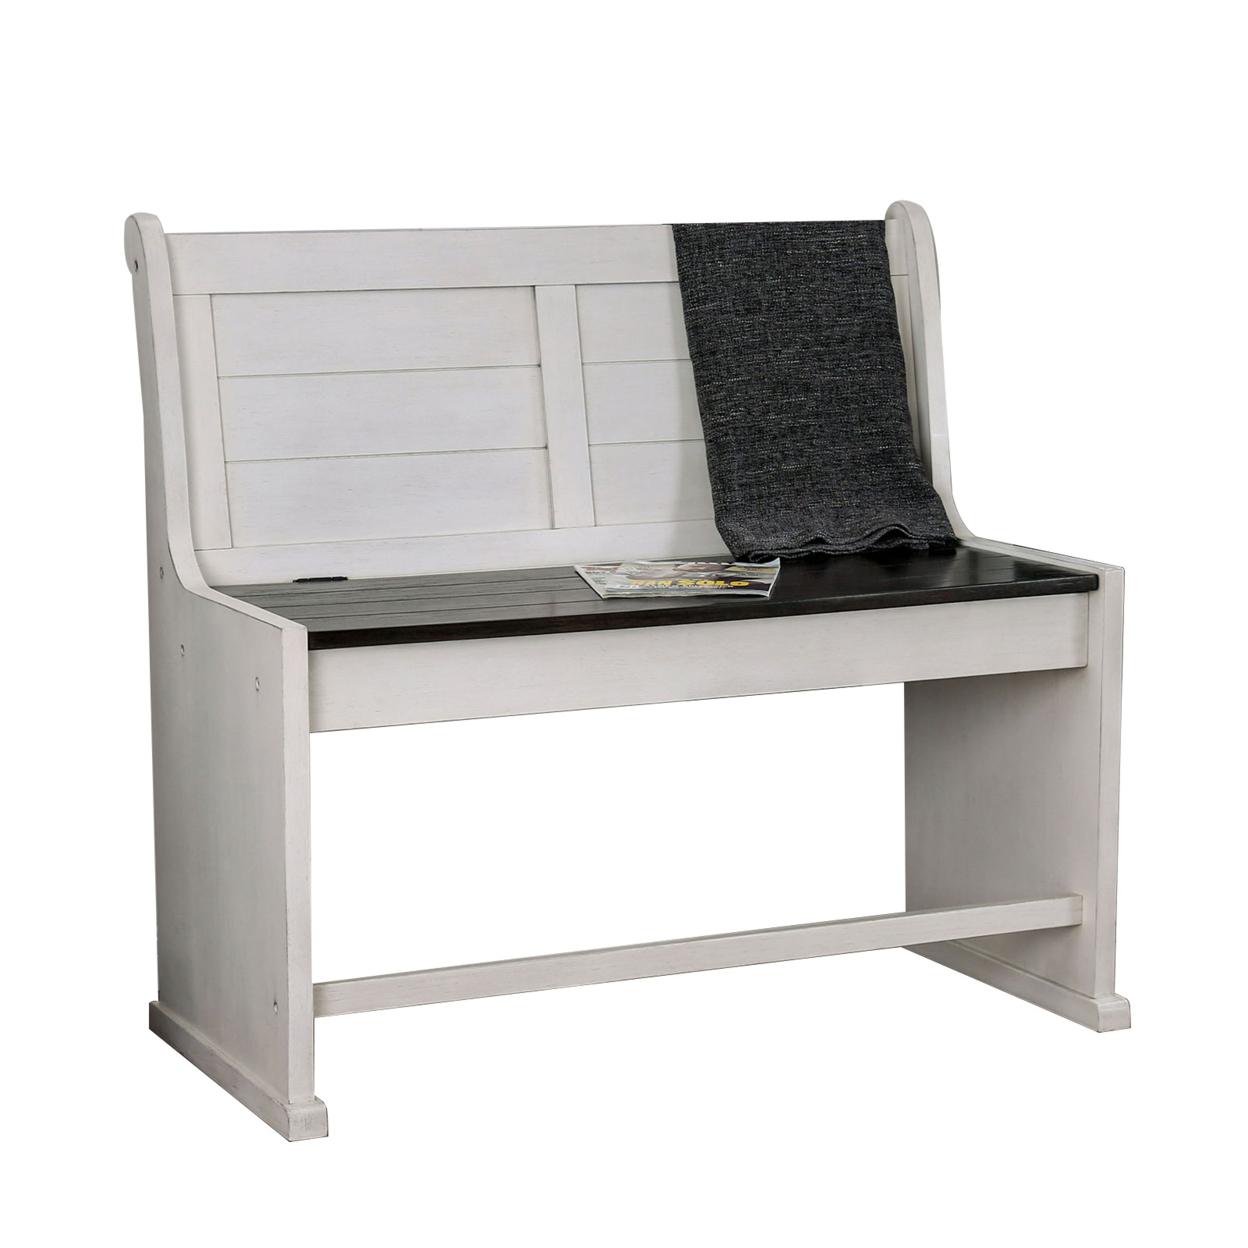 Wooden Counter Height Bench With Lift Top Seat, White And Black- Saltoro Sherpi